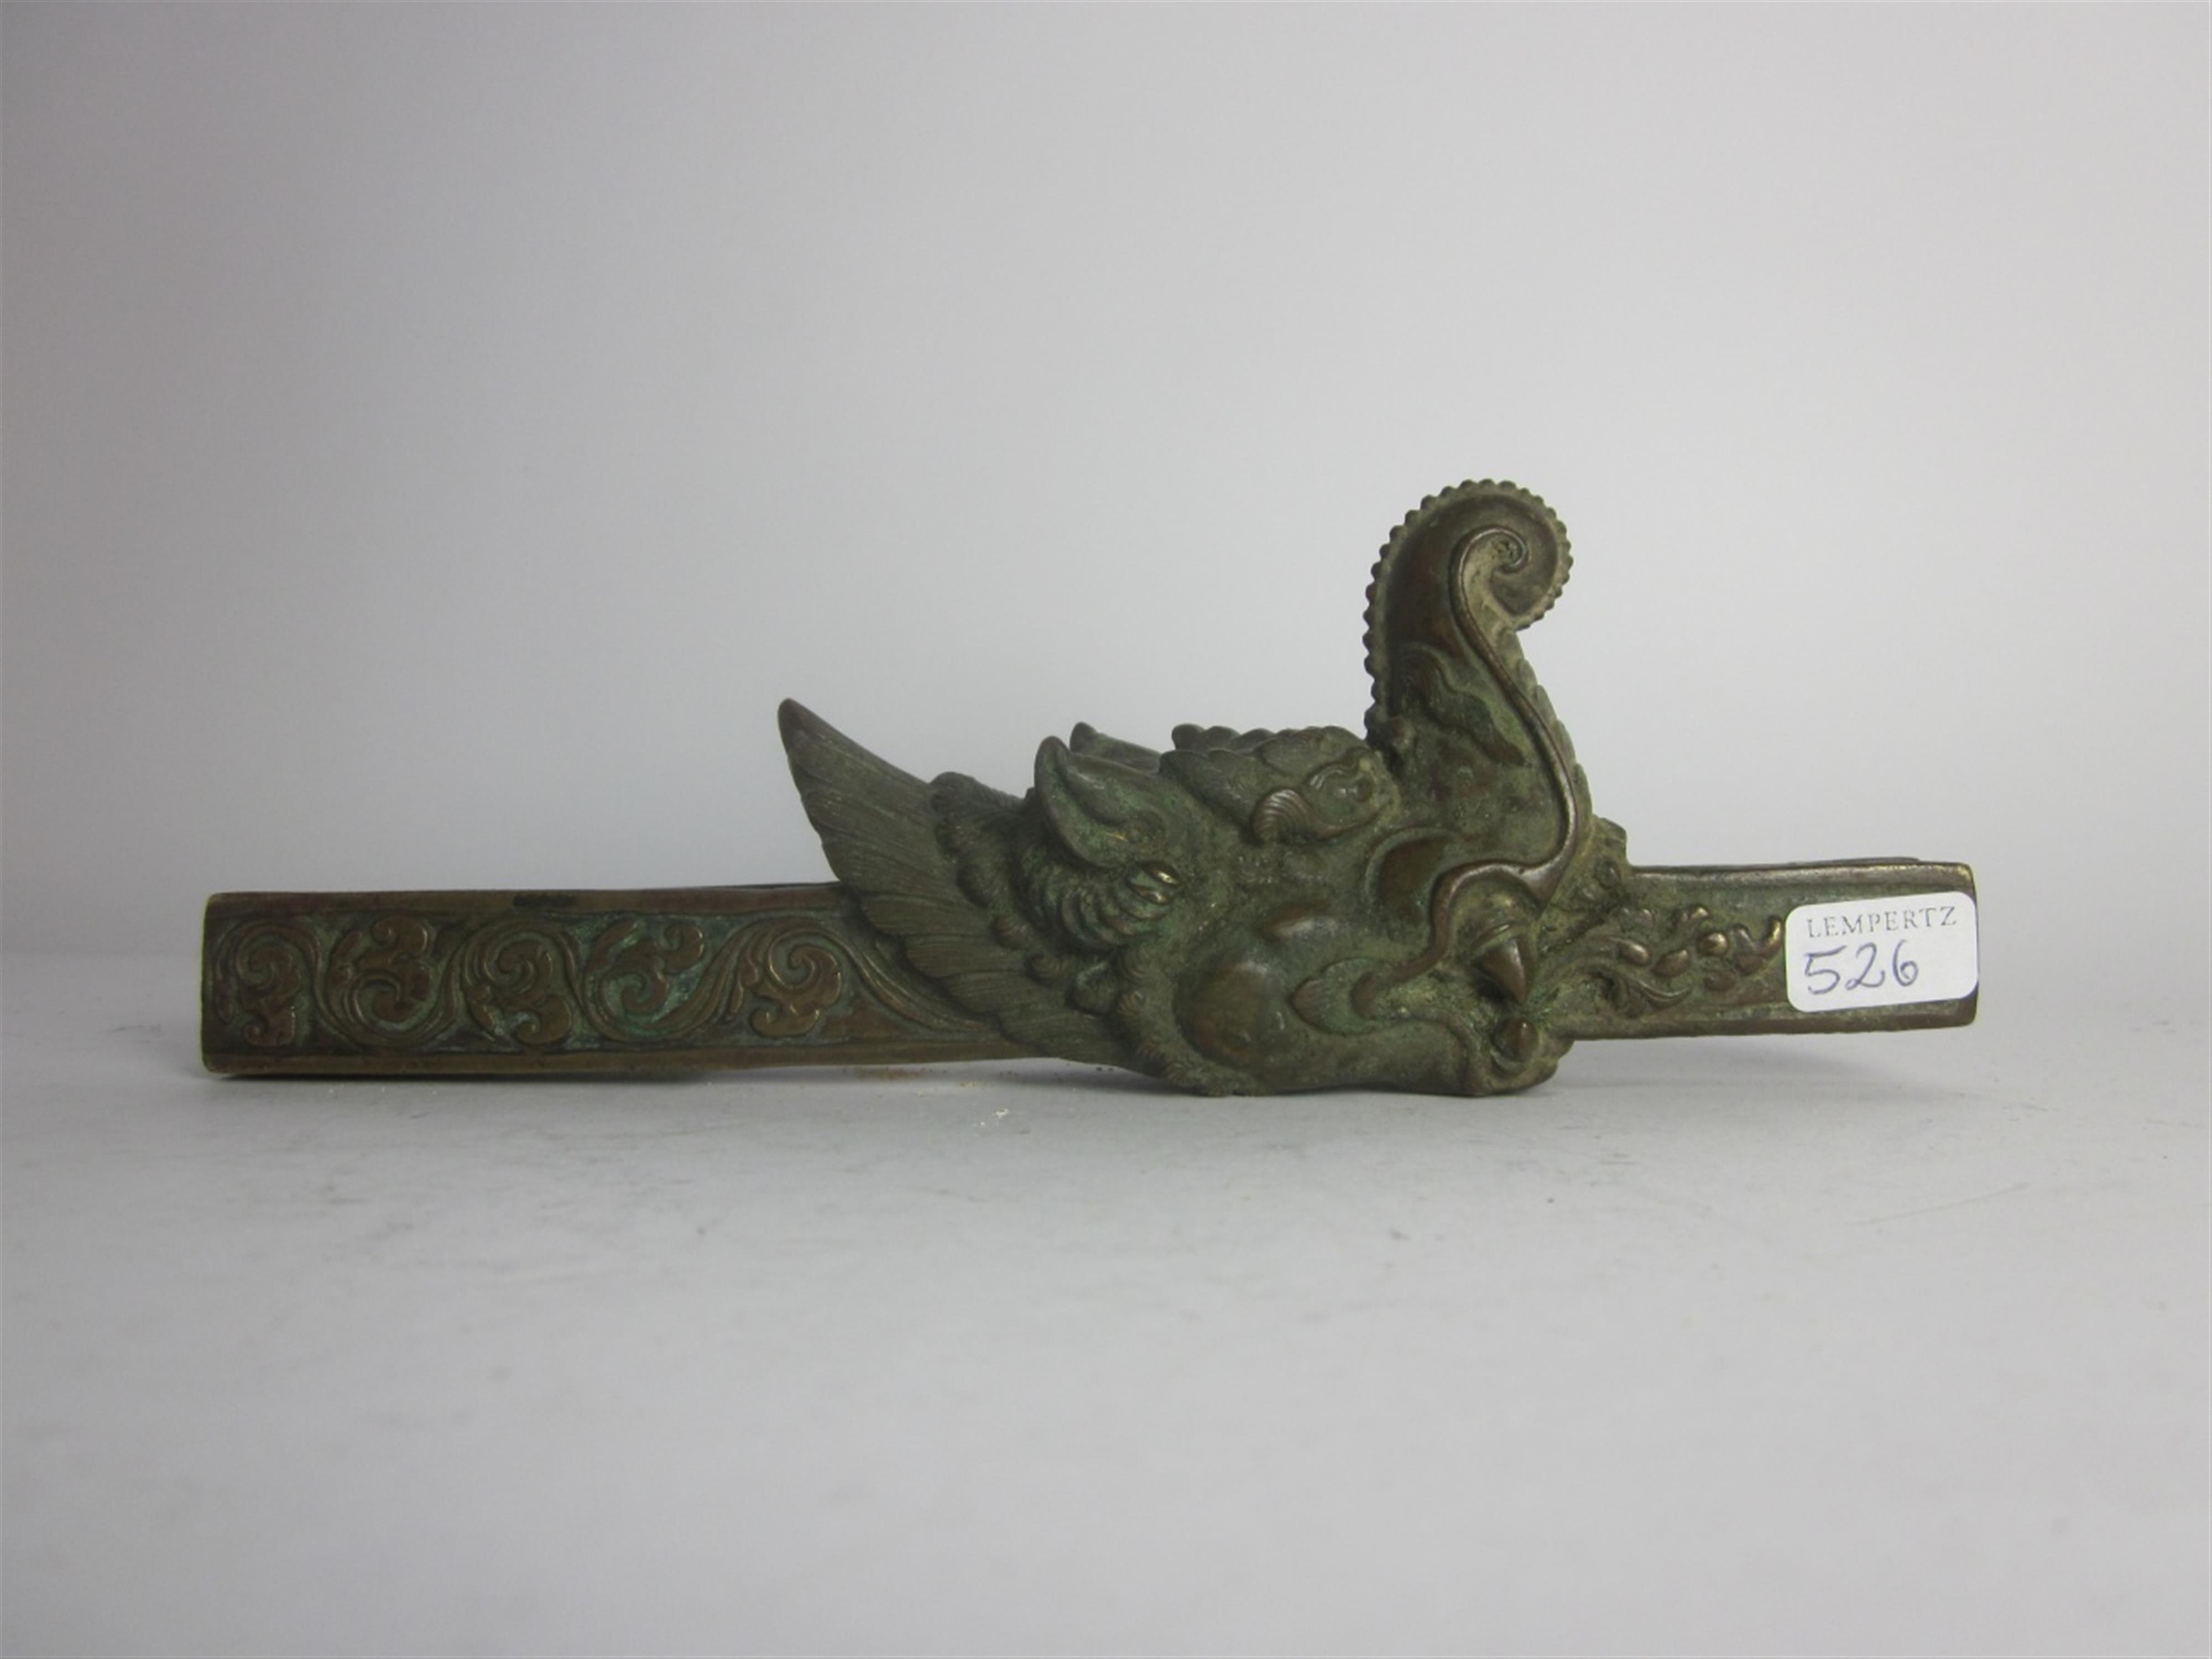 An Indian or South-East Asian bronze object. 19th or earlier - image-1